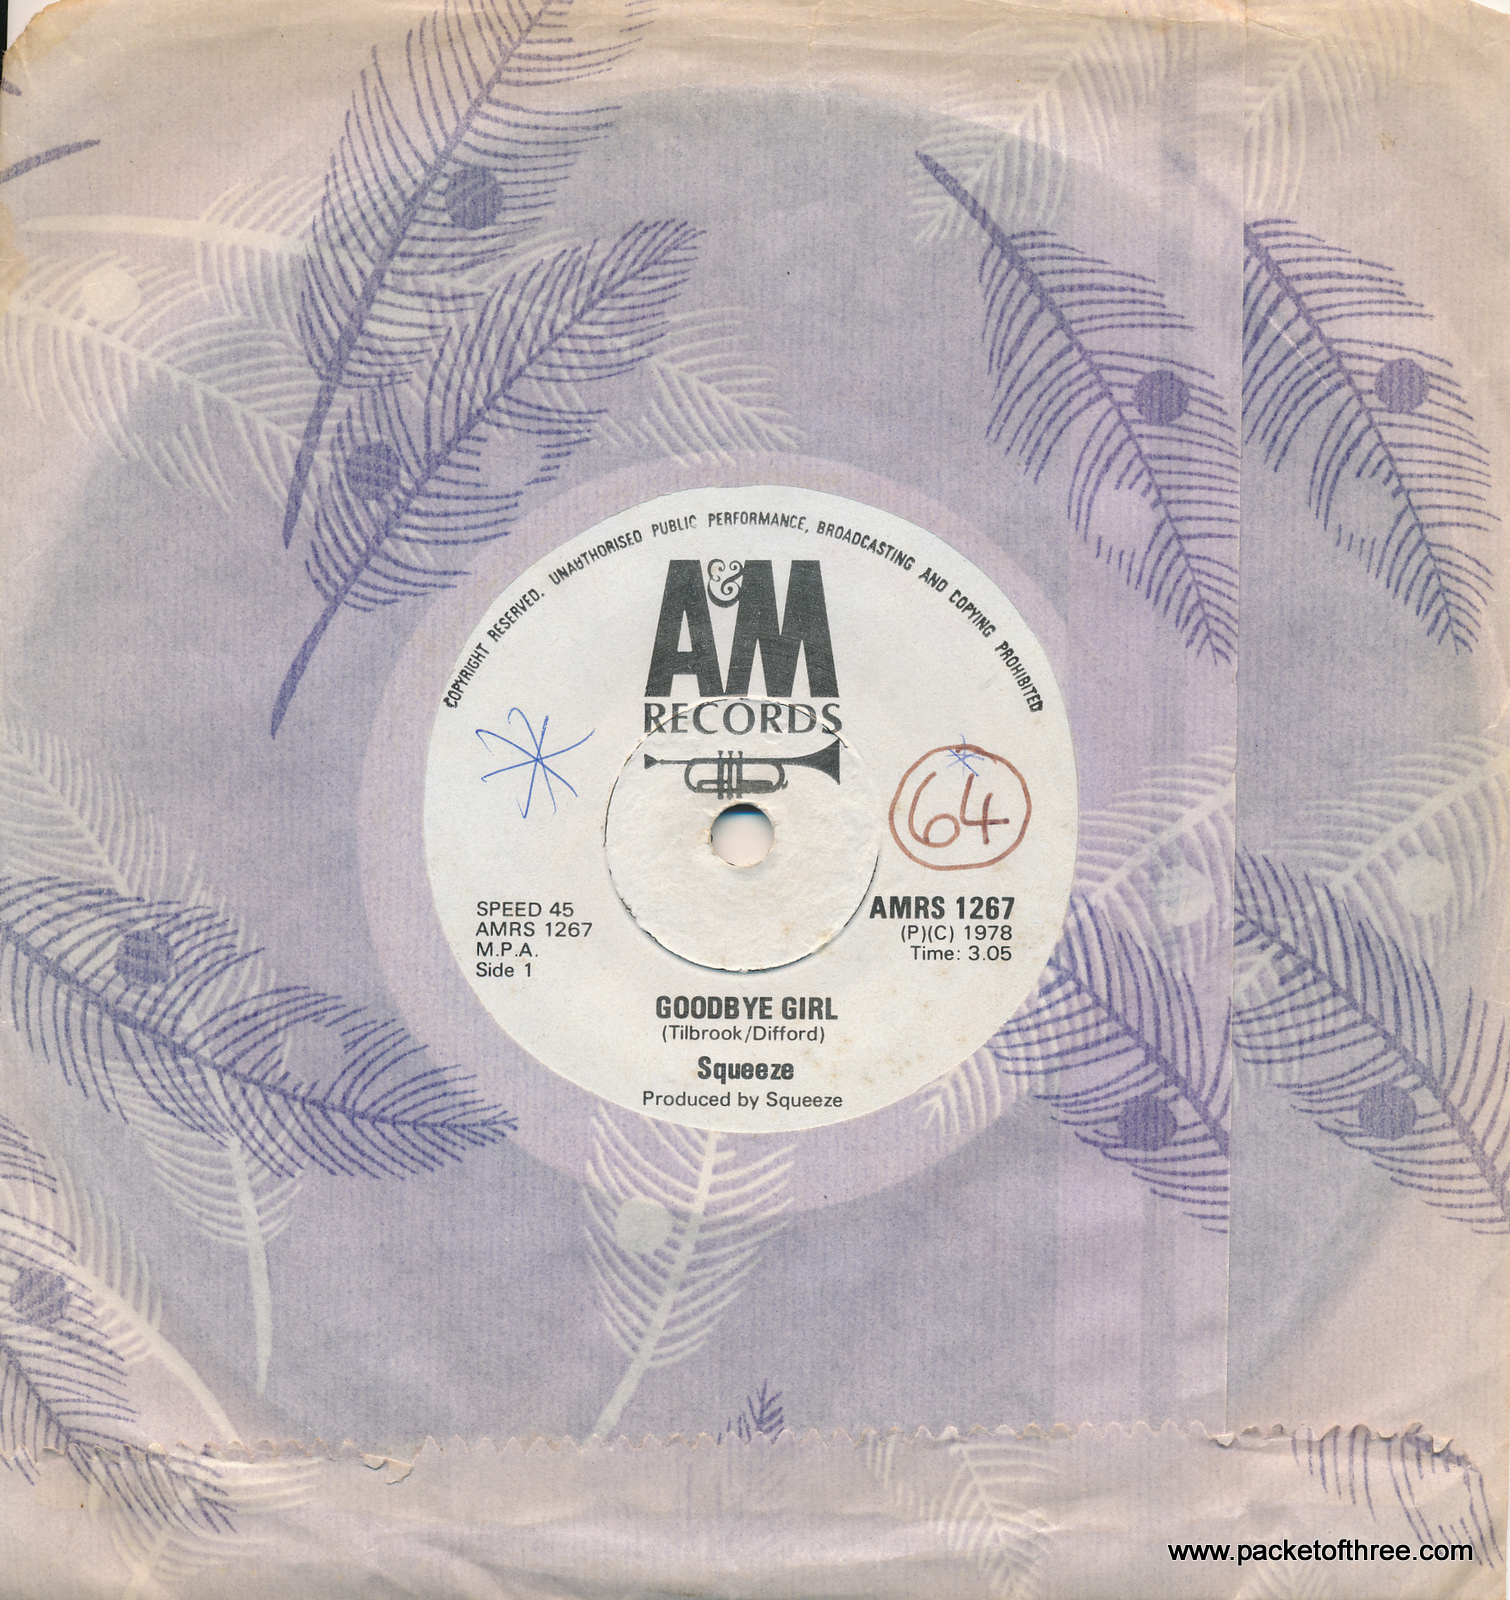 AMRS 1267 Goodbye Girl - Republic of South Africa - 7"